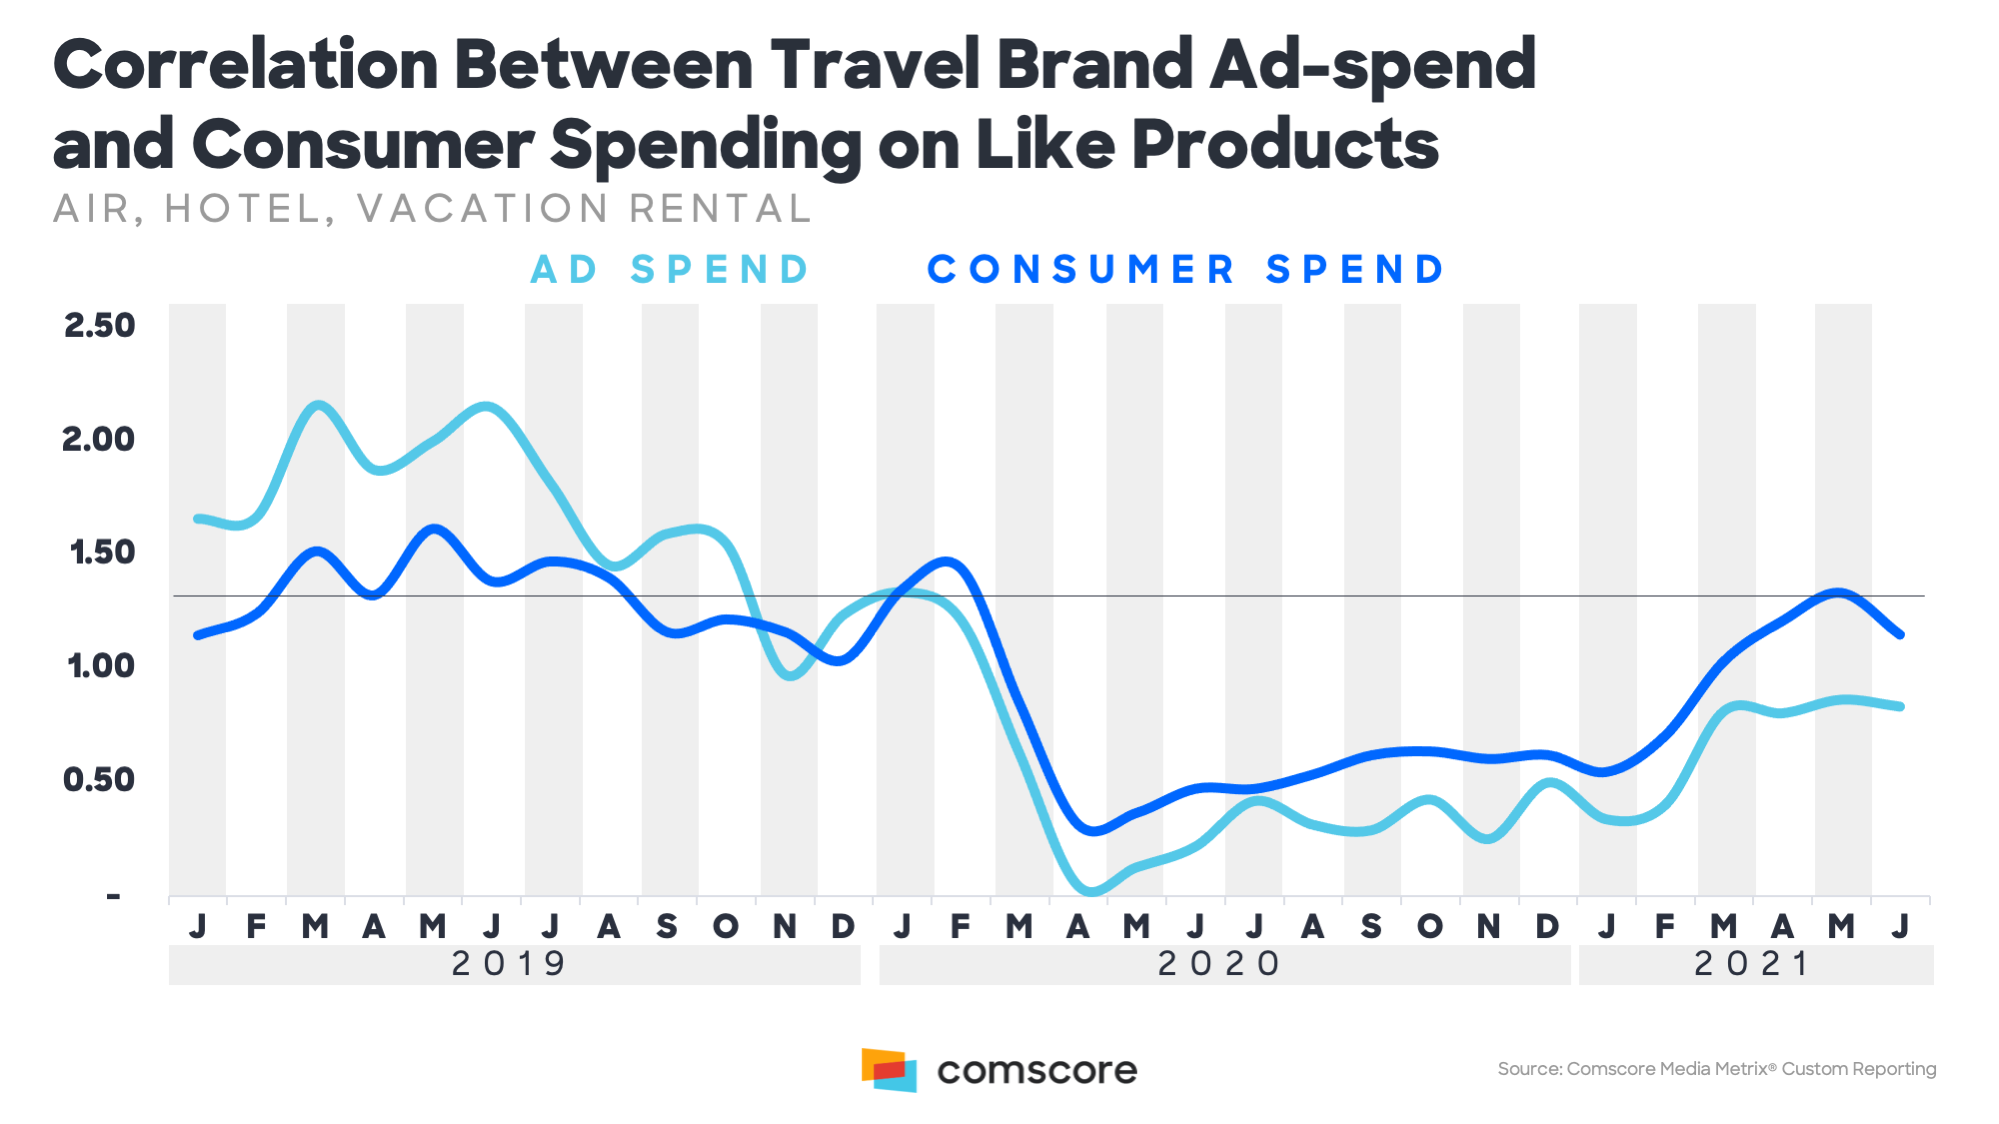 Correlation between Travel Brand Ad-spend and Consumer Spending on Like Products